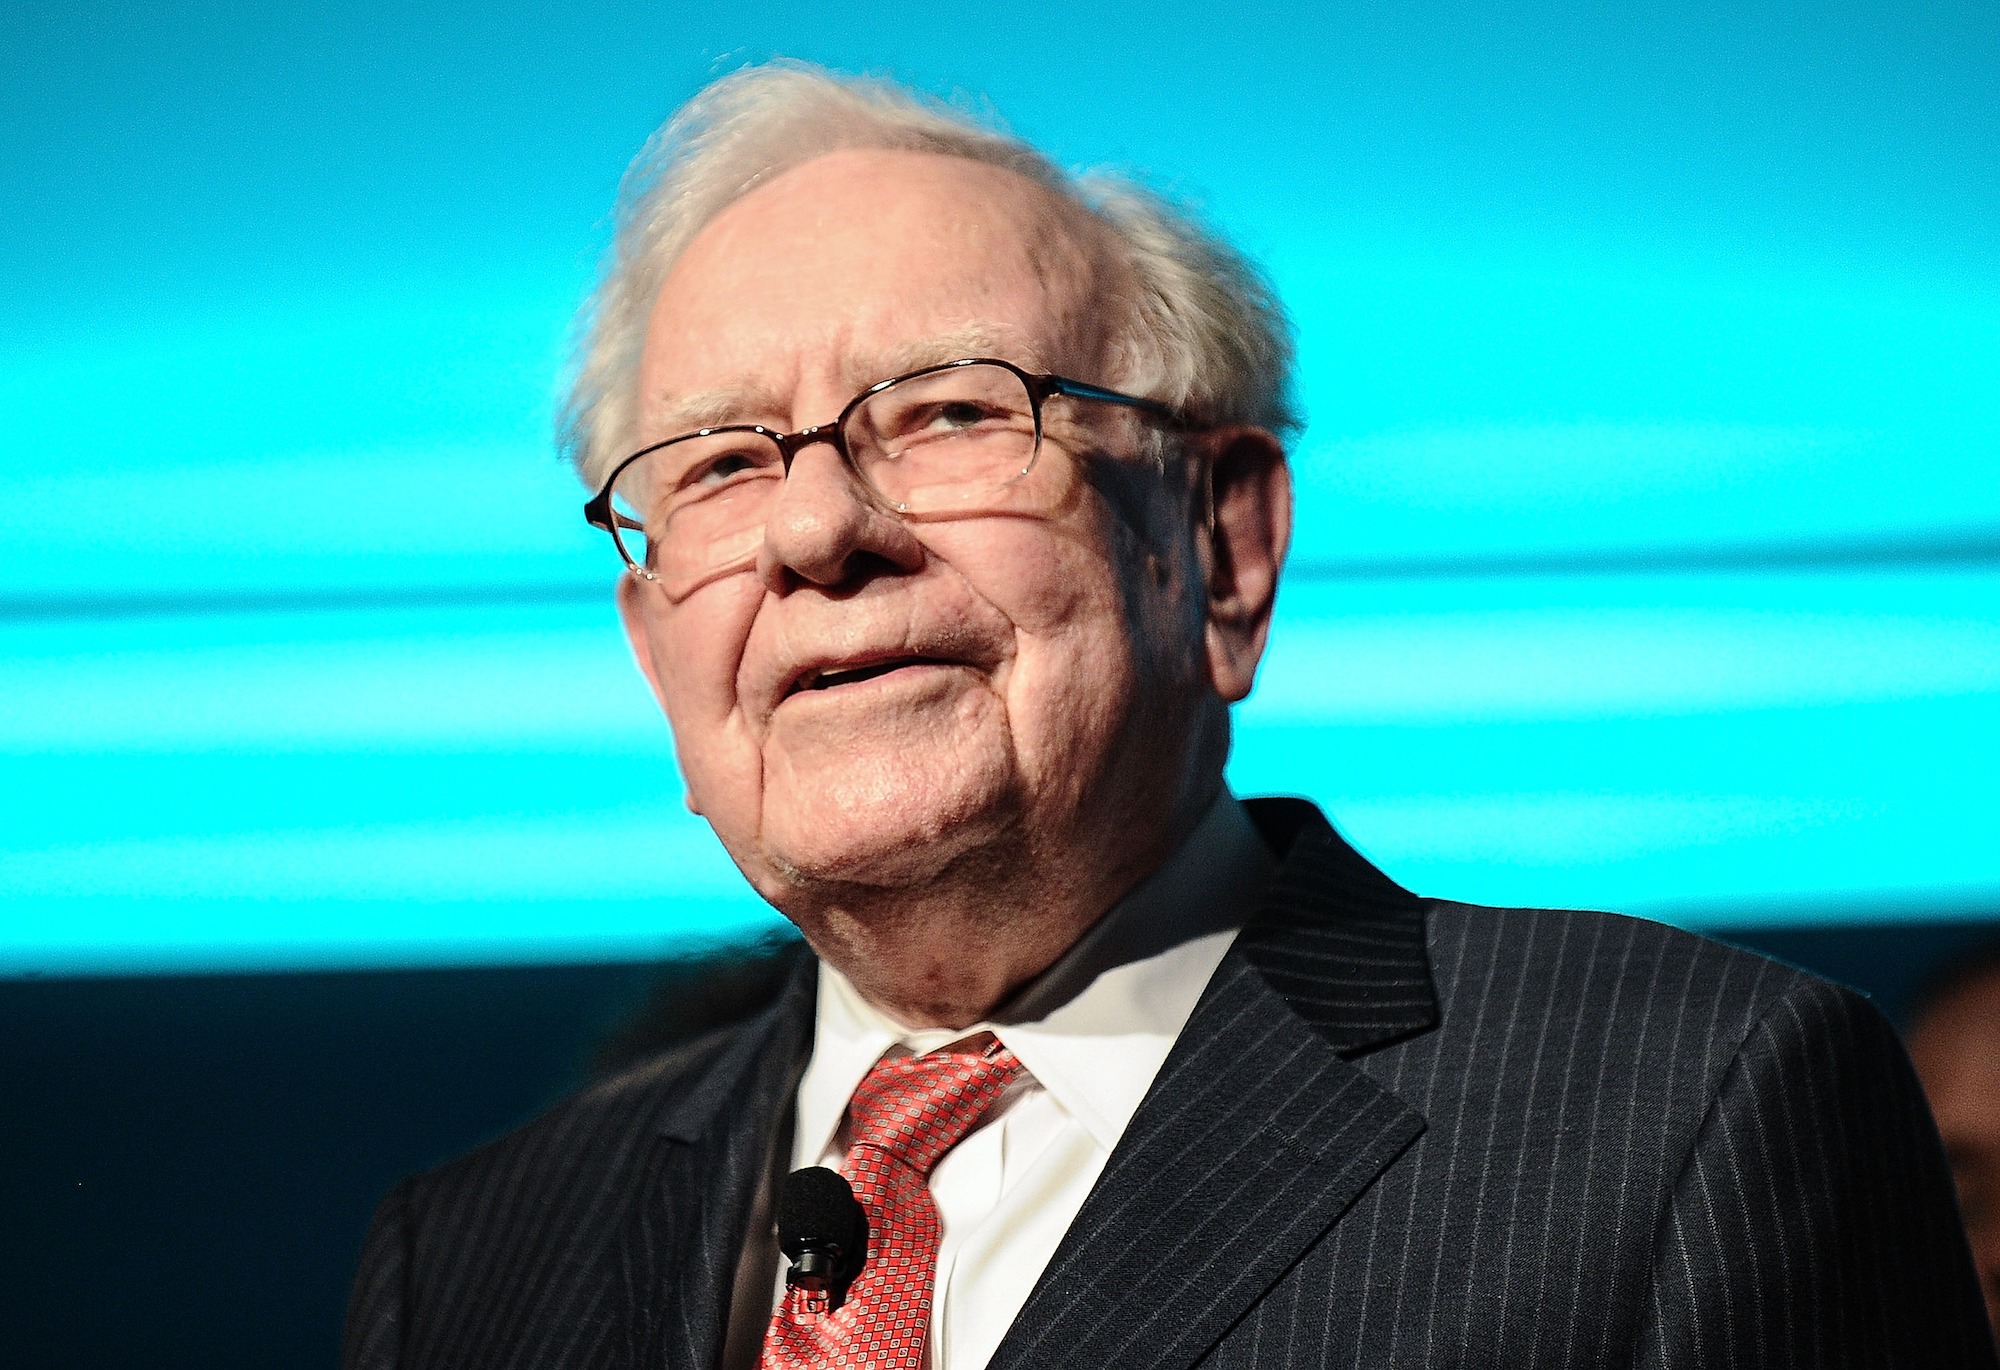 Philanthropist and businessman Warren Buffett on-stage during the Forbes Media Centennial Celebration on September 19, 2017, at Pier 60 in New York City